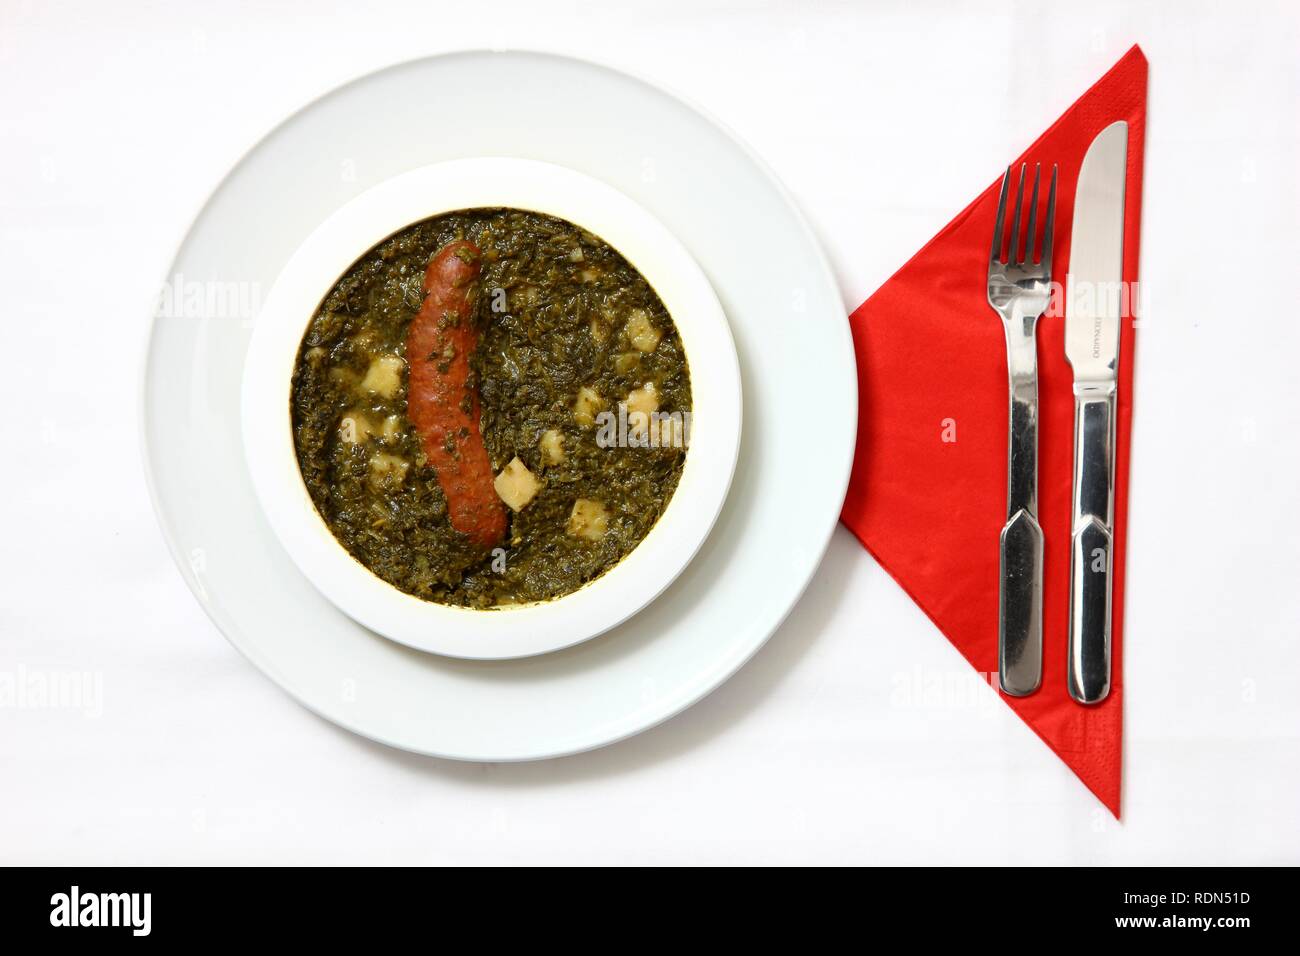 Kale with smoked sausage, pre-prepared meal, served on a plate, in the original packaging Stock Photo